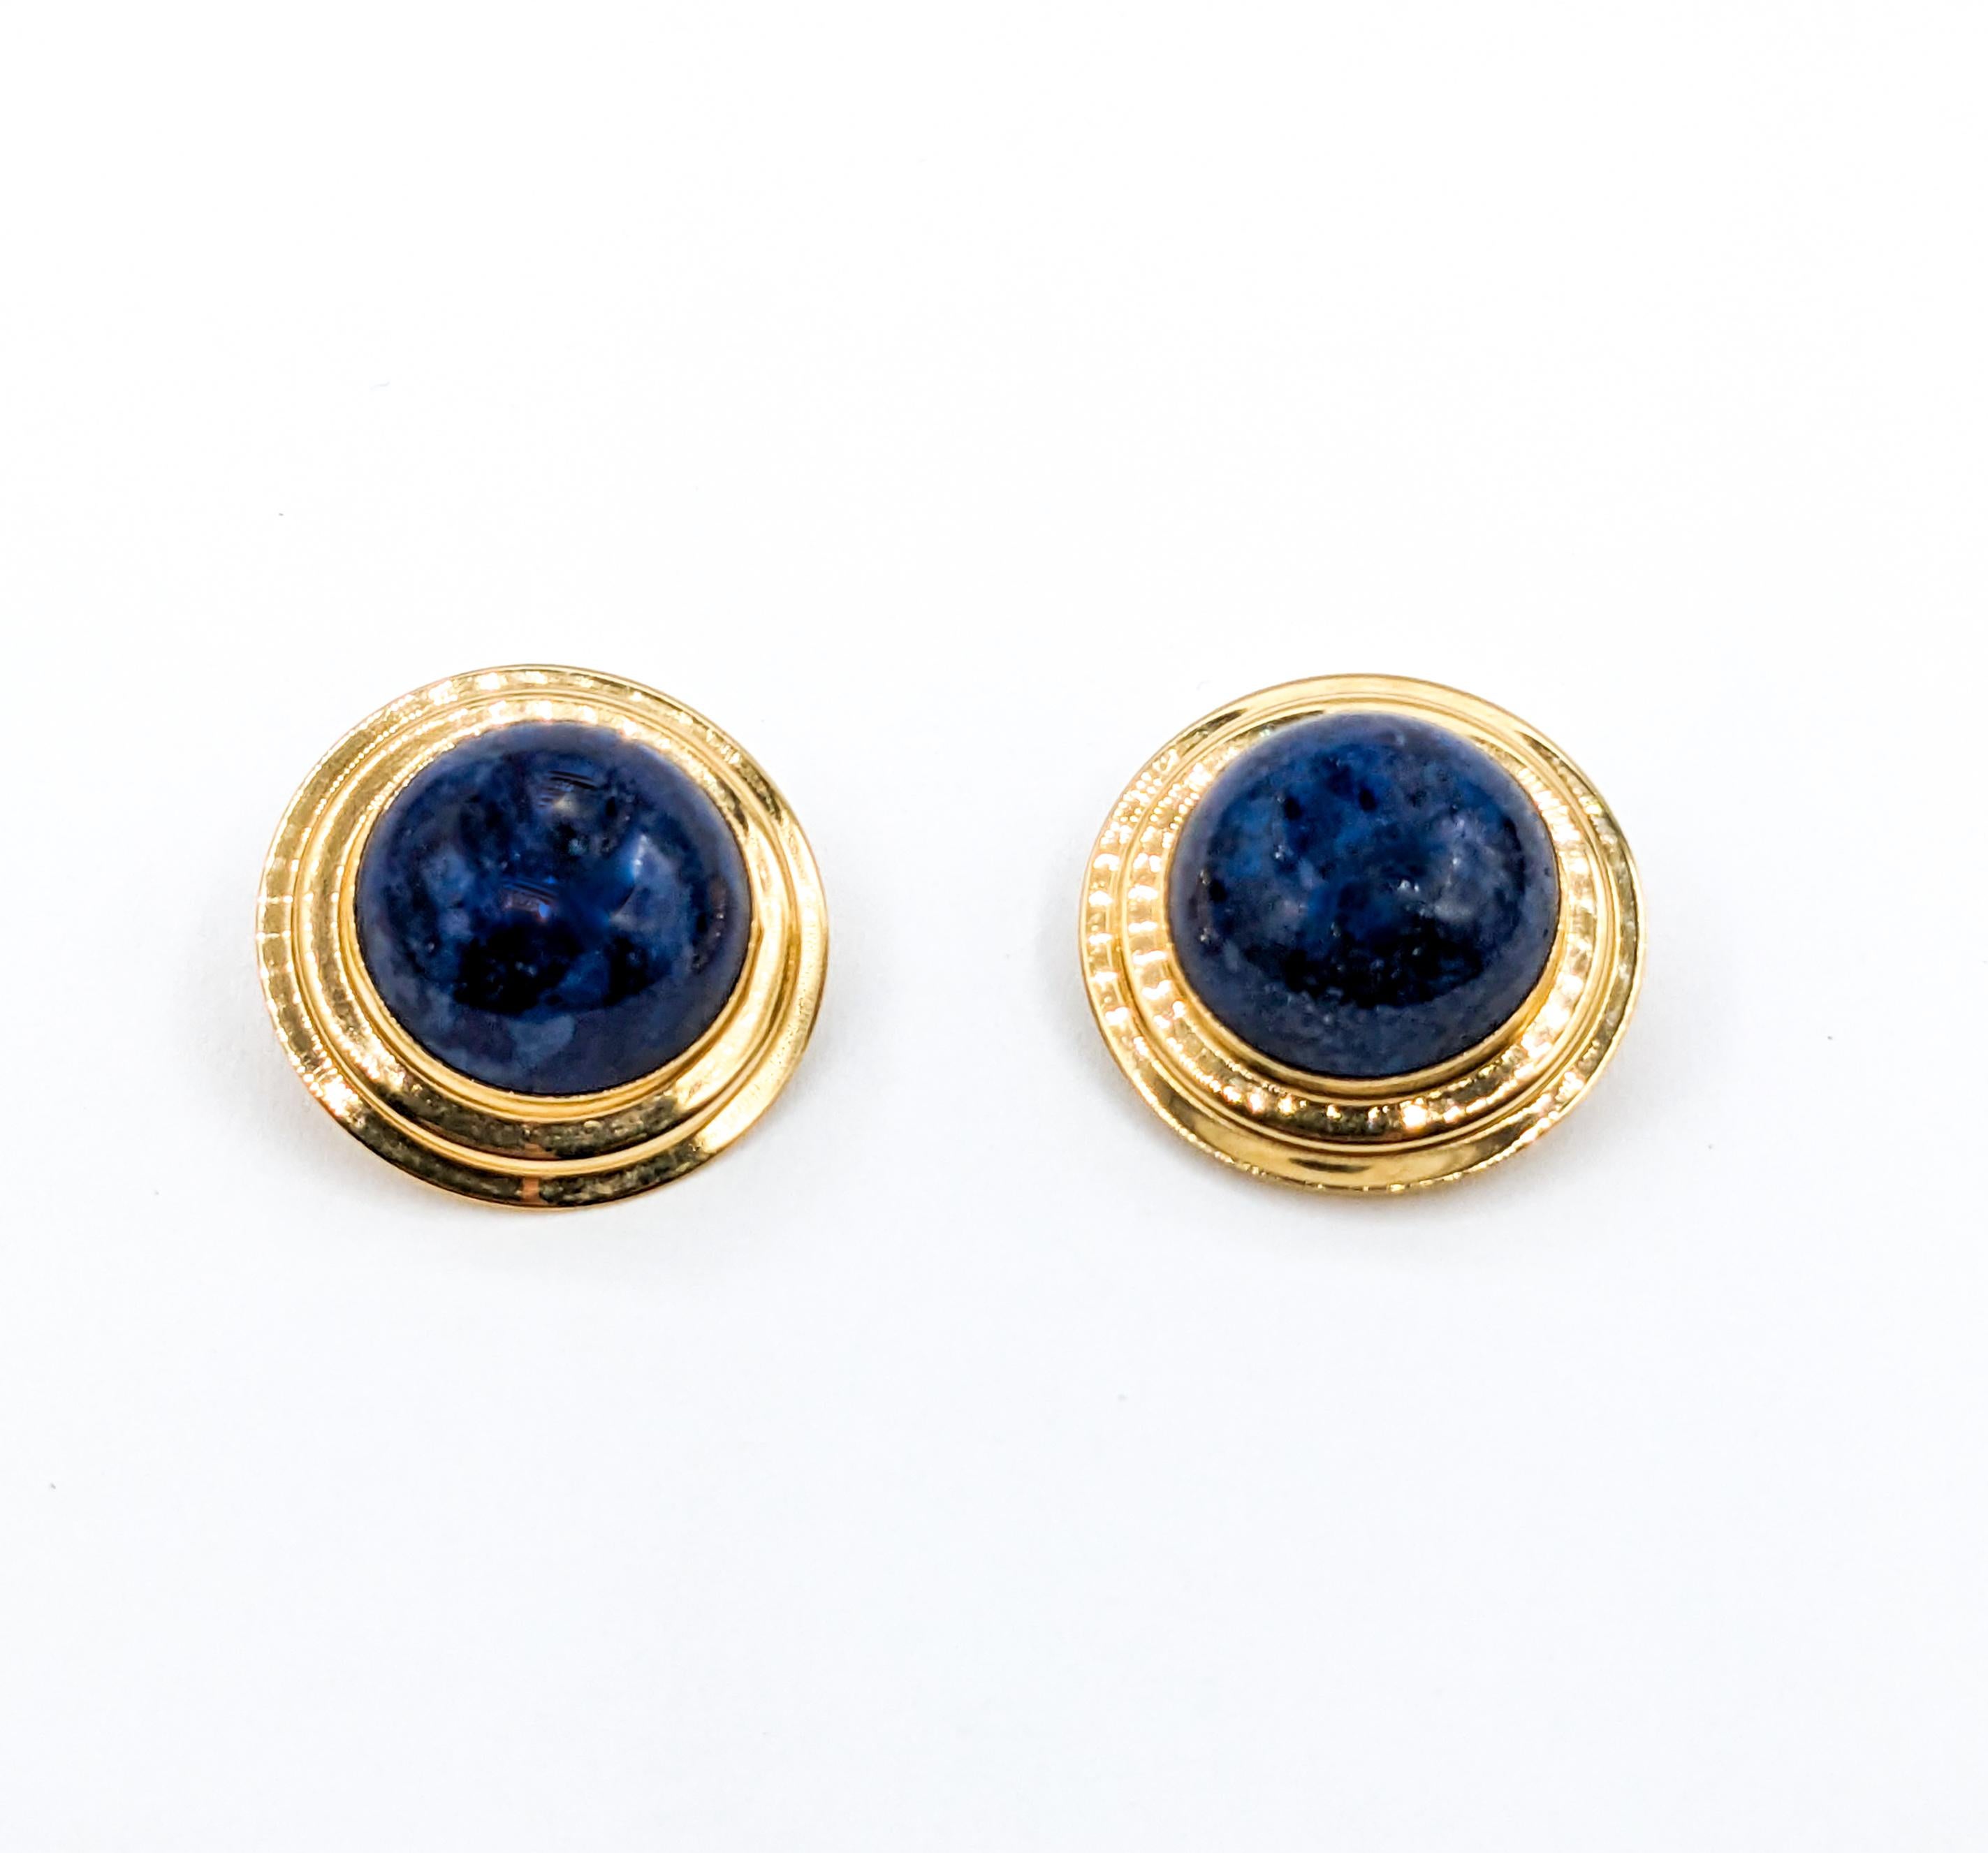 Statement Gold & Cabochon Lapis Clip On Earrings For Sale 3